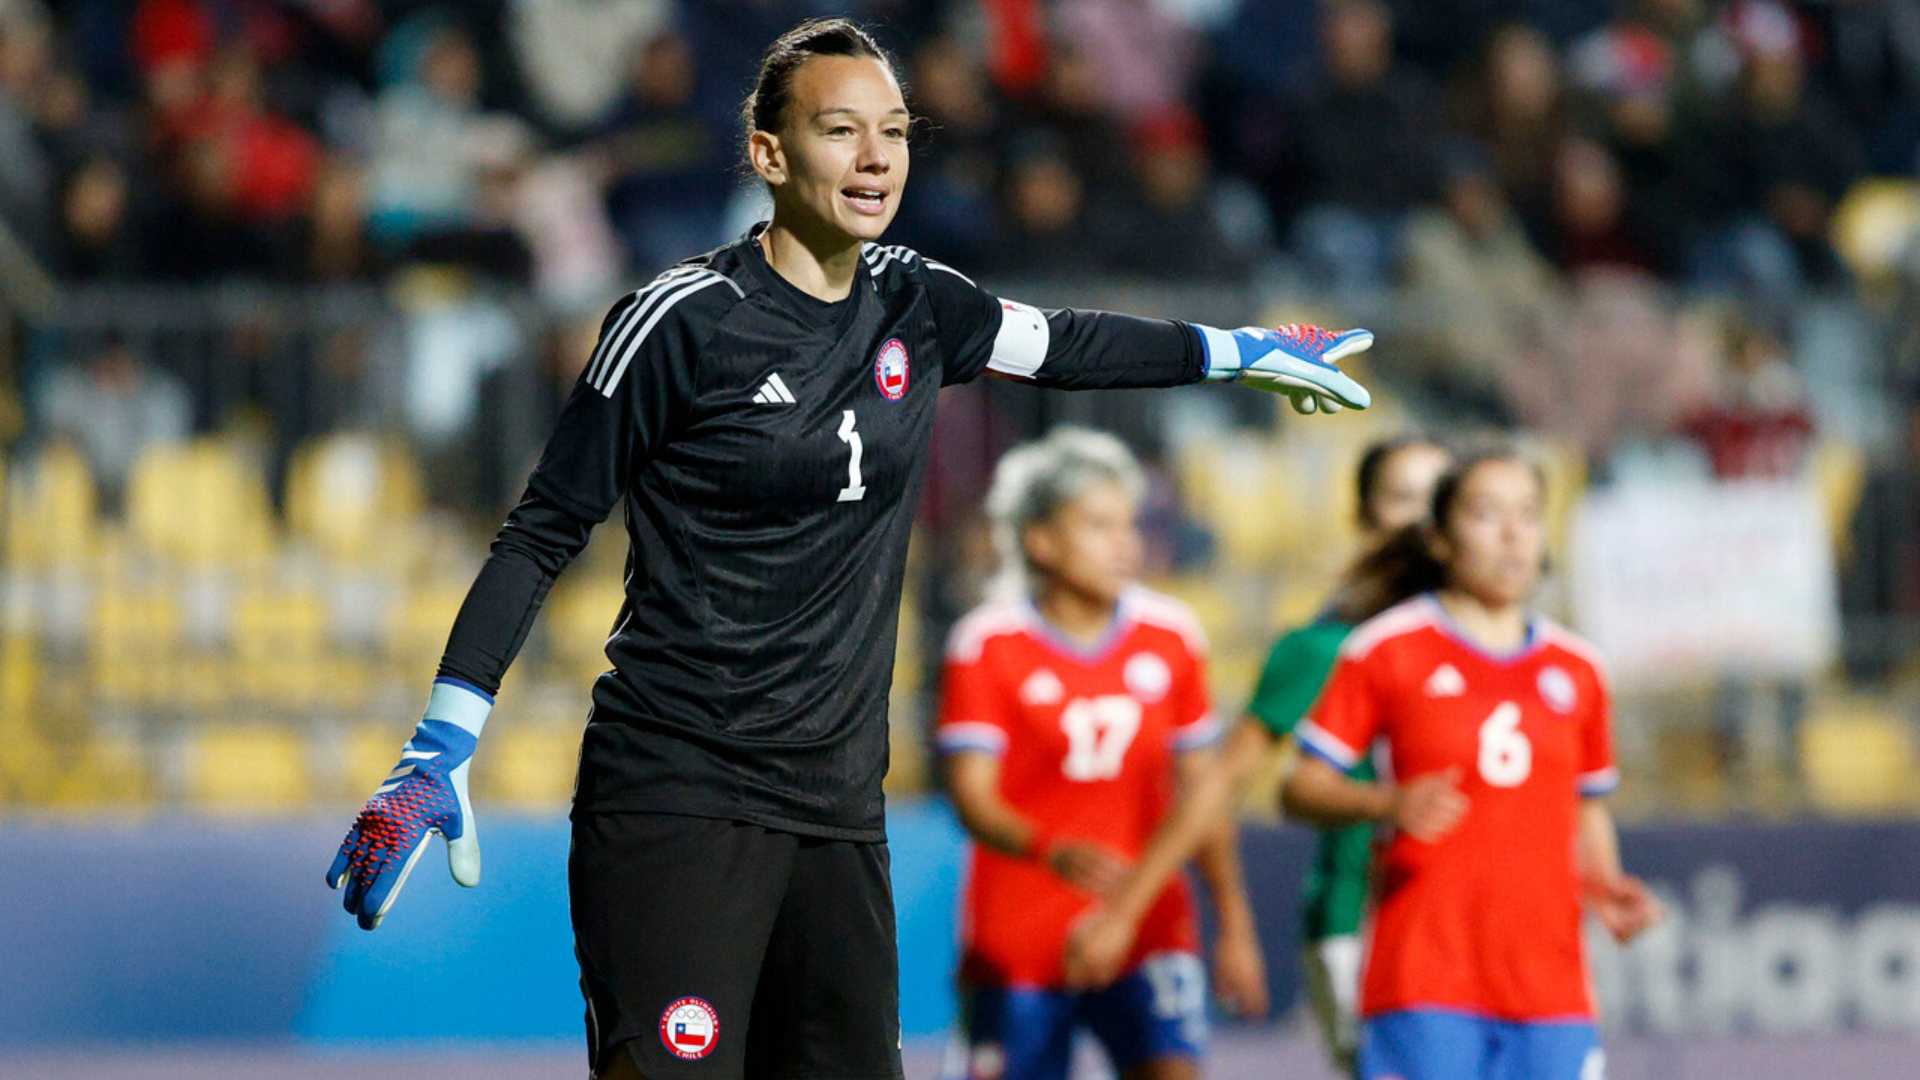 México clearly defeats Chile in women's soccer